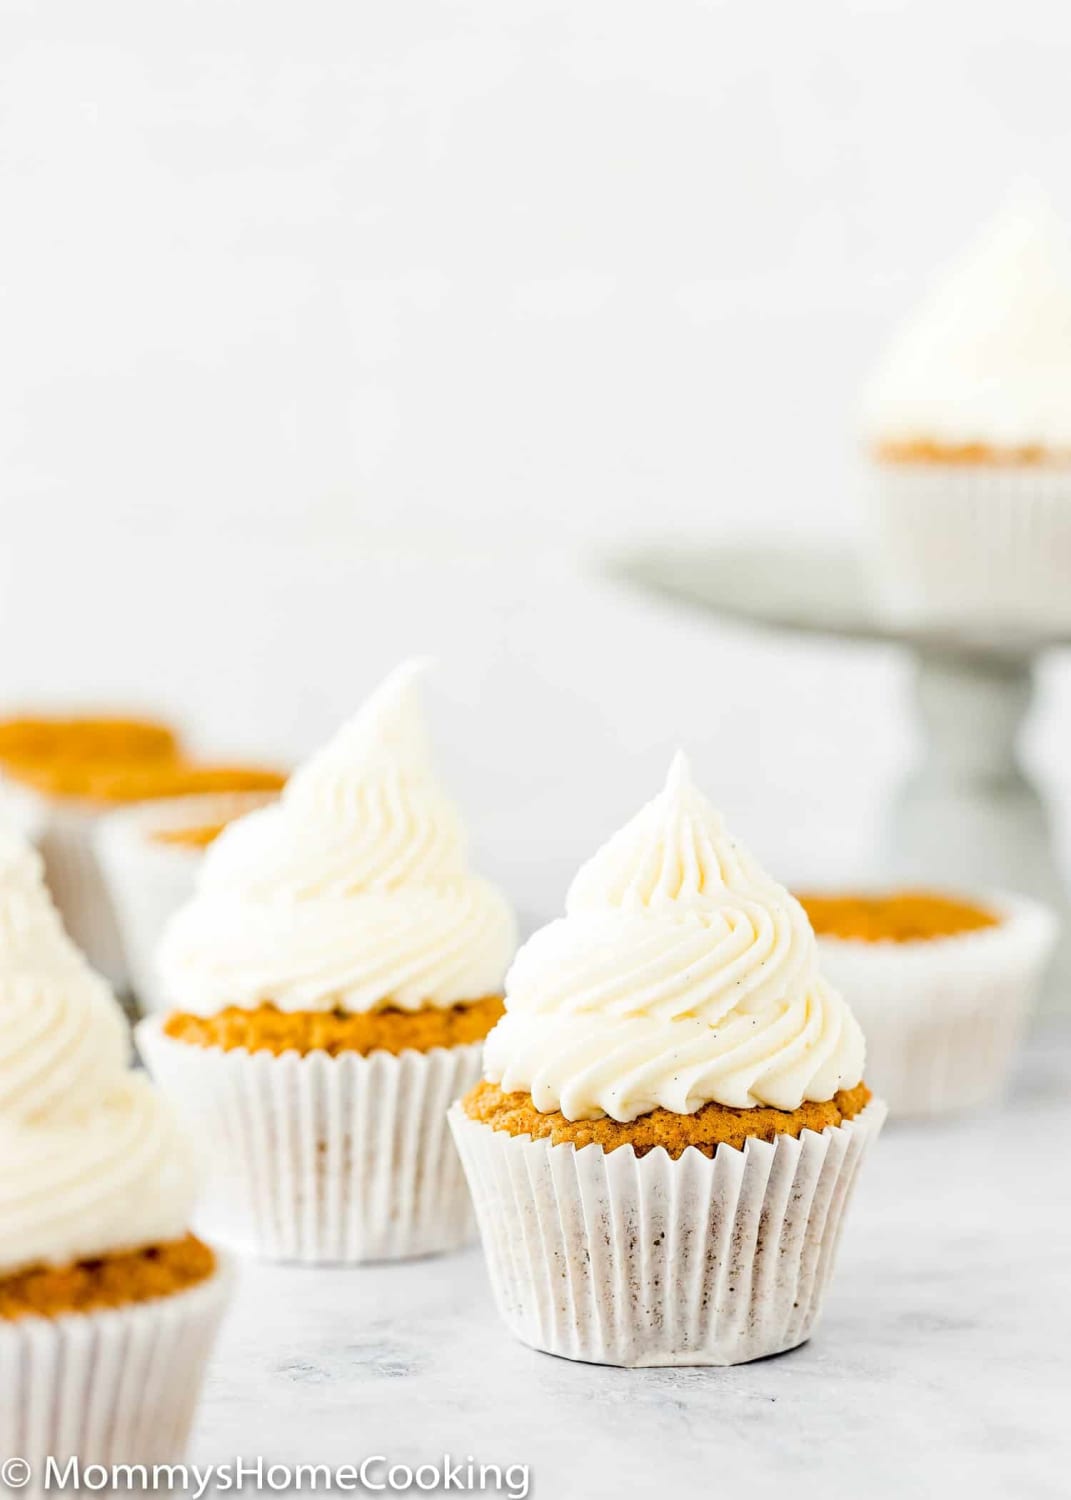 Favorite Cream Cheese Frosting That Isn’t Runny!